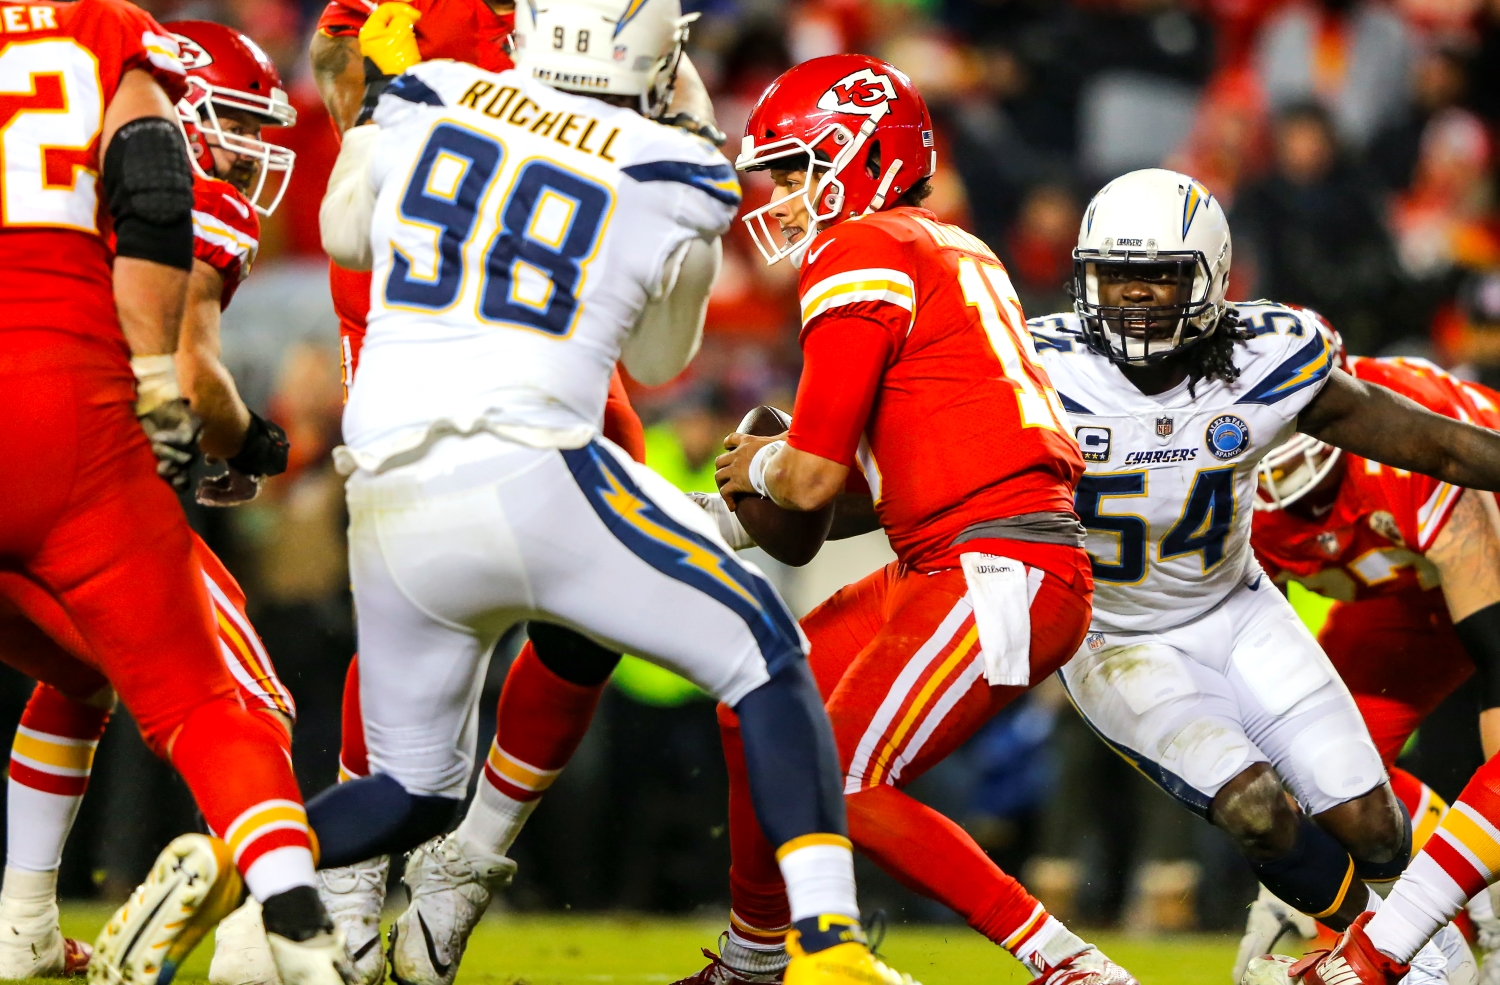 Kansas City Chiefs QB Patrick Mahomes is pressured by Los Angeles Chargers outside linebacker Melvin Ingram.